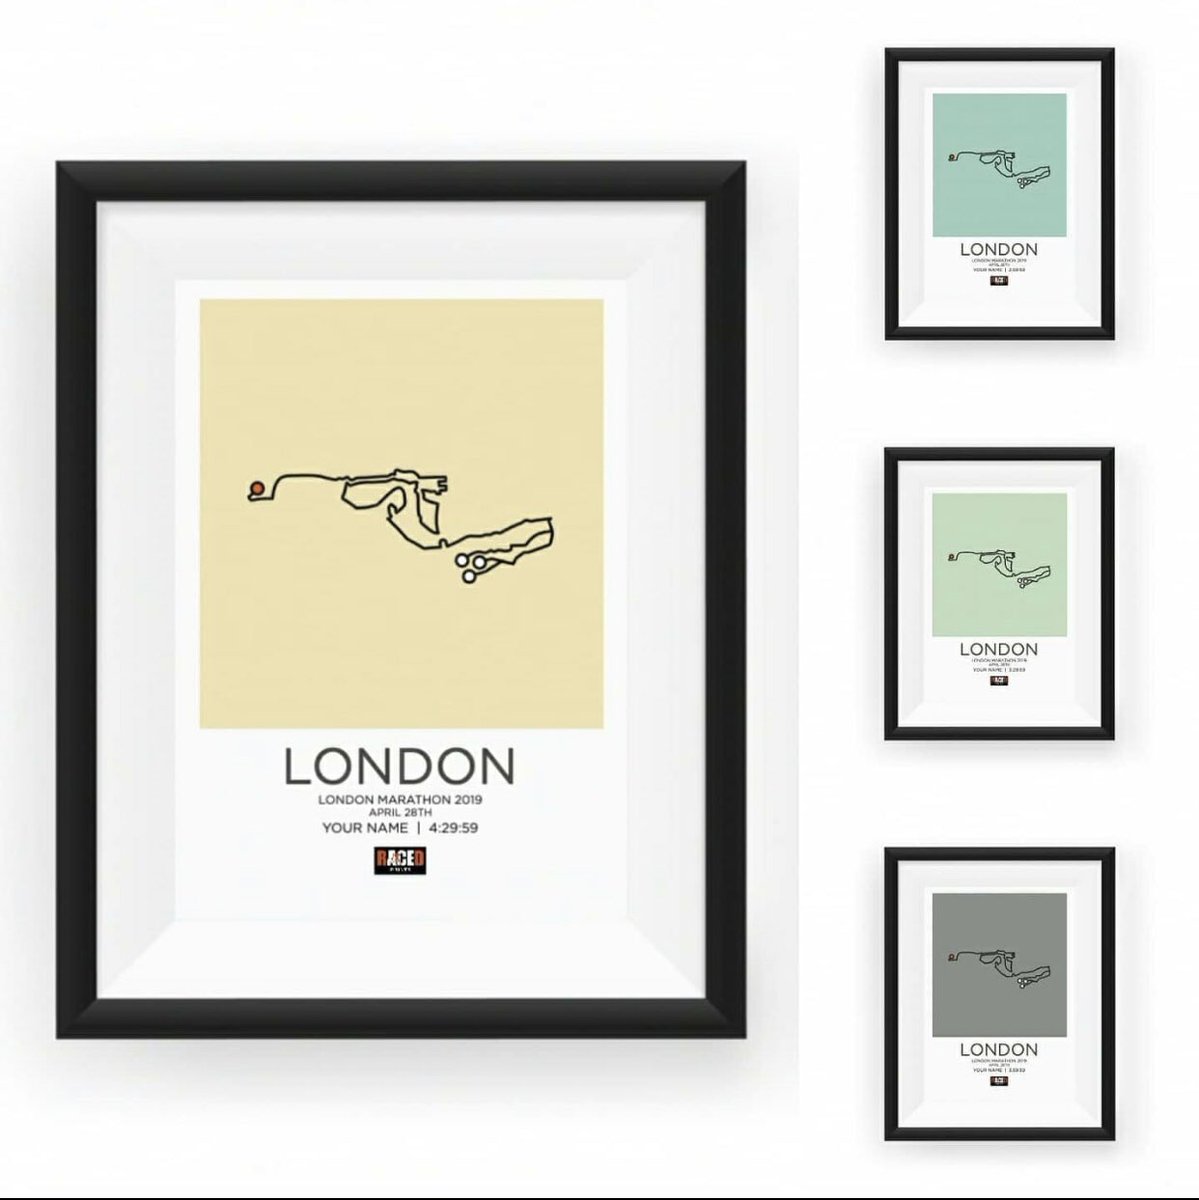 Still basking in the glory of finishing this years @LondonMarathon and want to commemorate your success? Then why not treat yourself to your very own personalised London race print. racedcoaching.com/shop/ols/produ… @UKRunChat